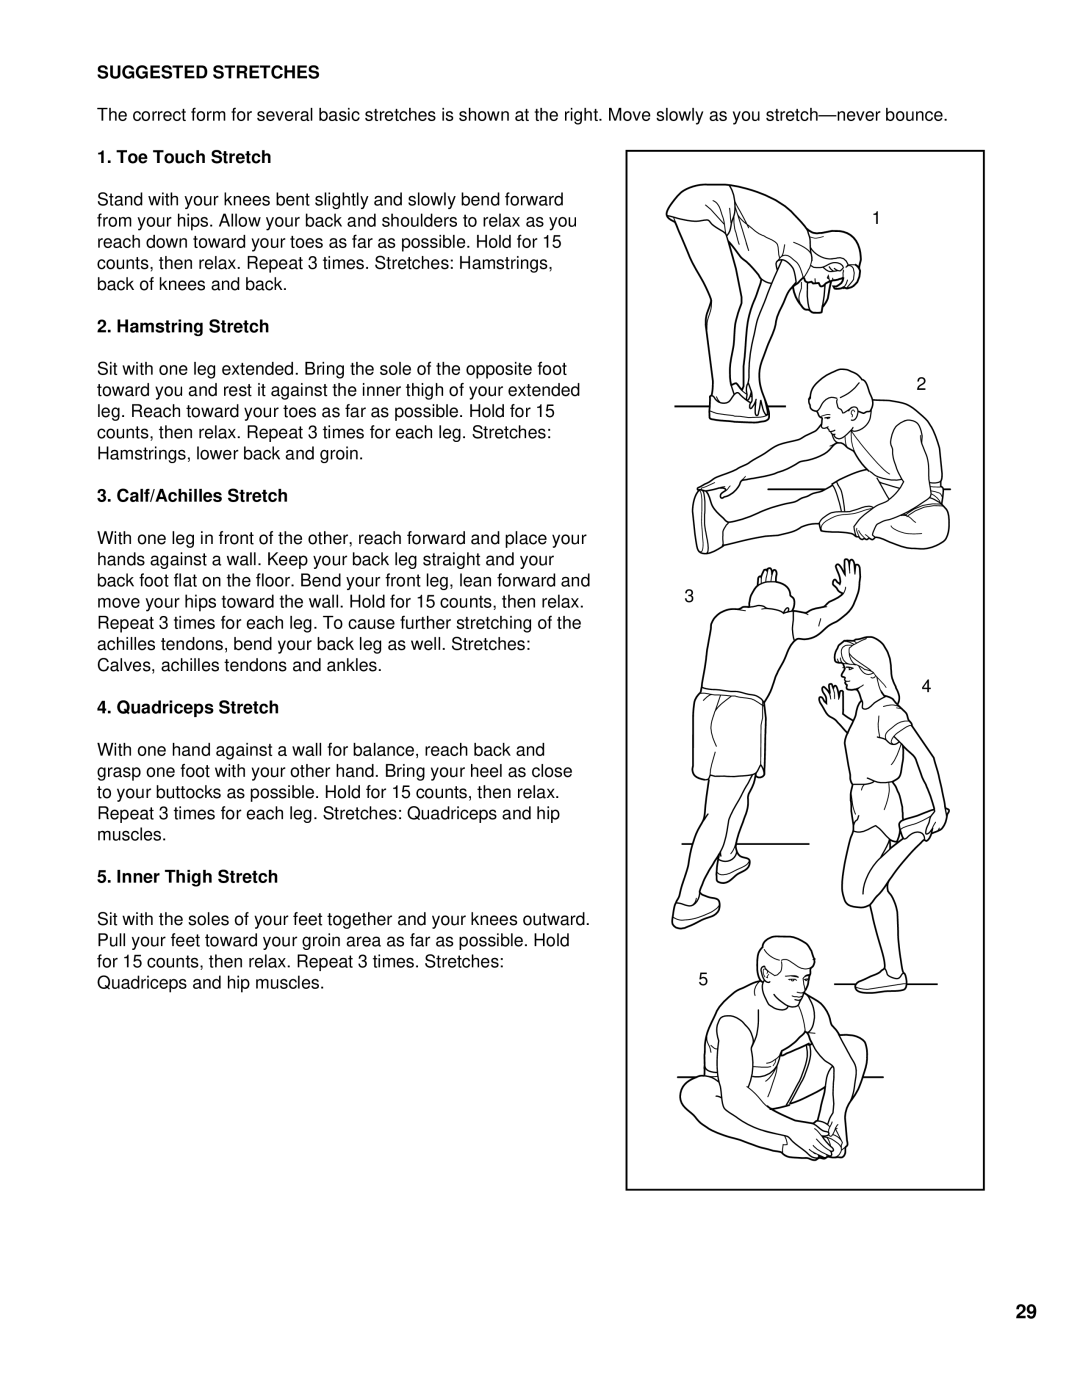 NordicTrack NCTL11991 user manual Suggested Stretches 